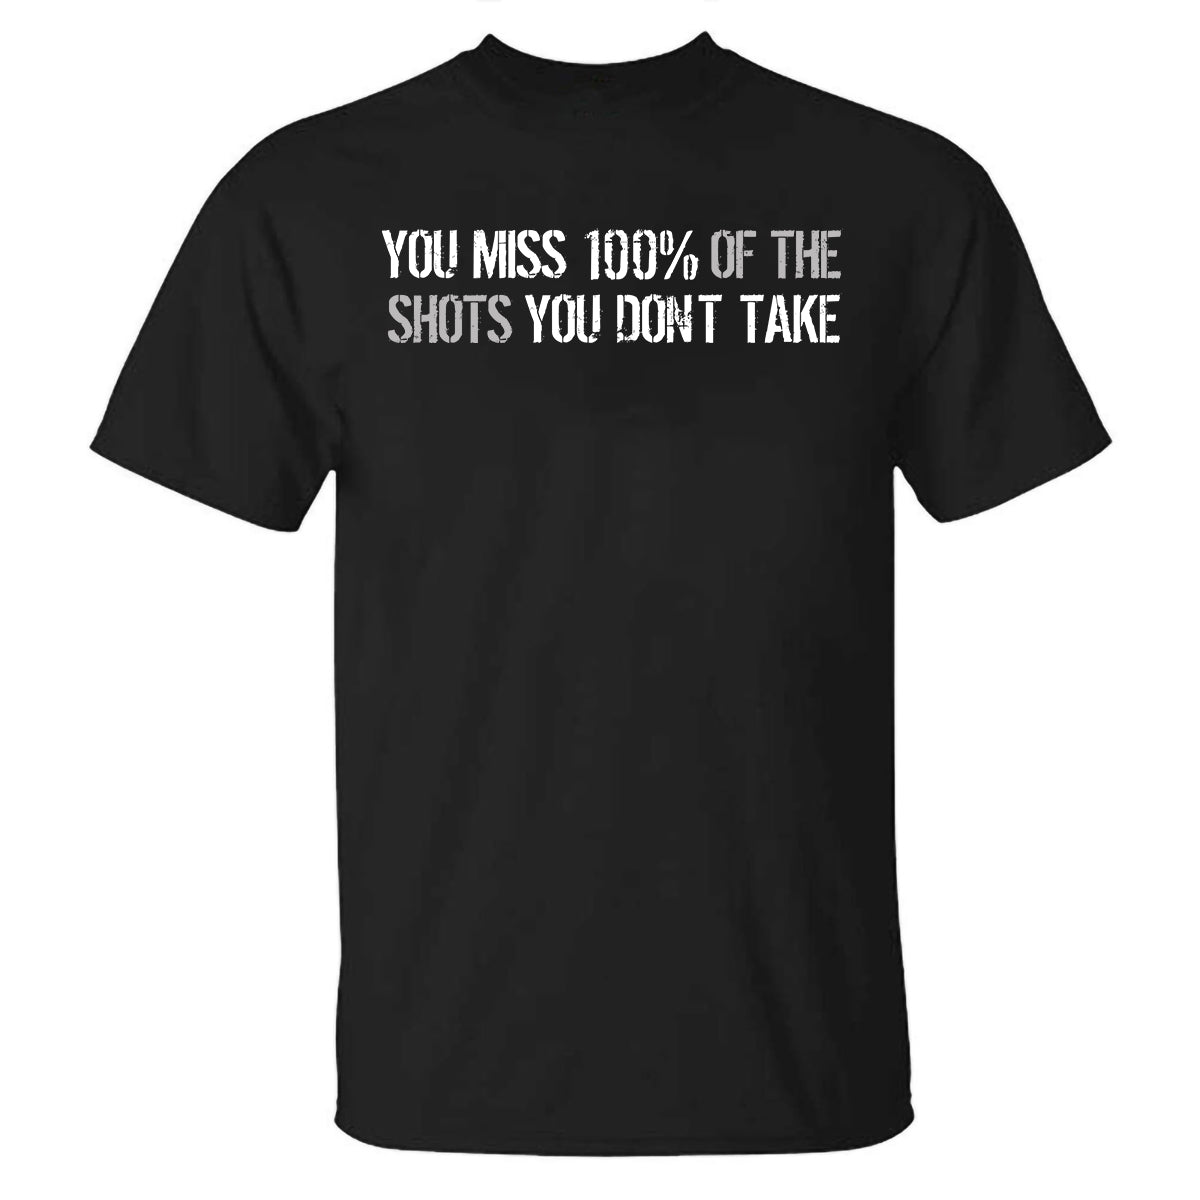 You Miss 100% Of The Shots You Don't Take Printed T-shirt